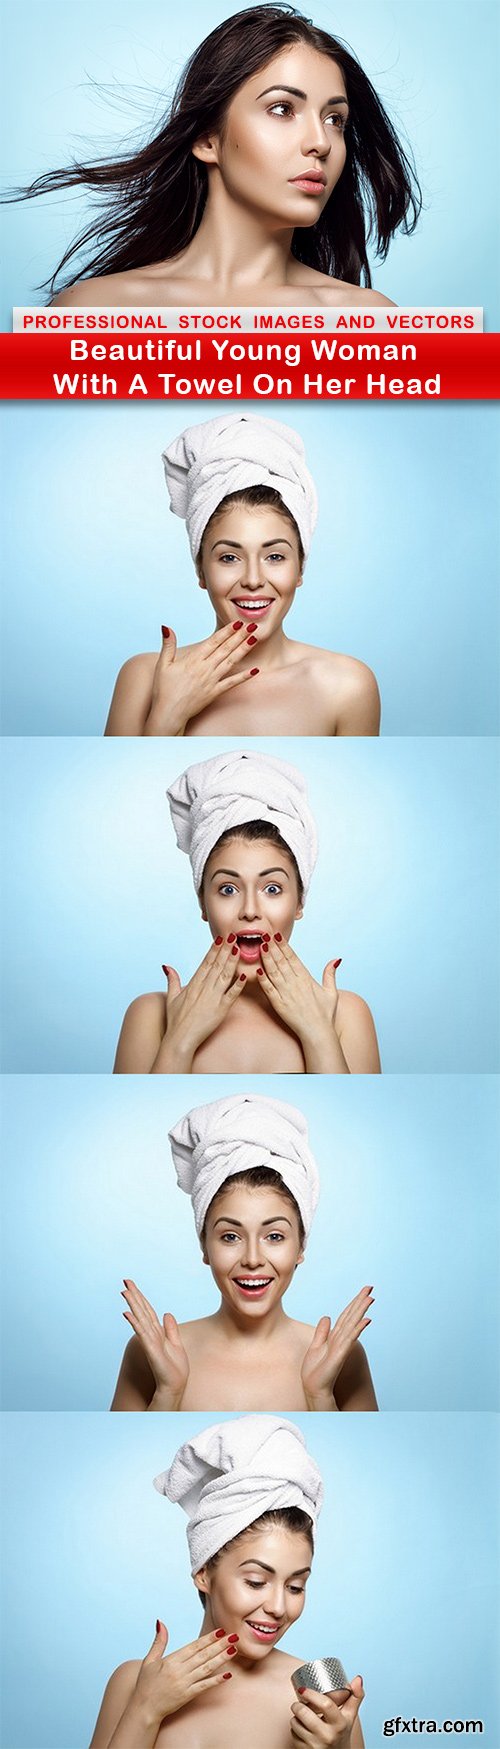 Beautiful Young Woman With A Towel On Her Head - 5 UHQ JPEG